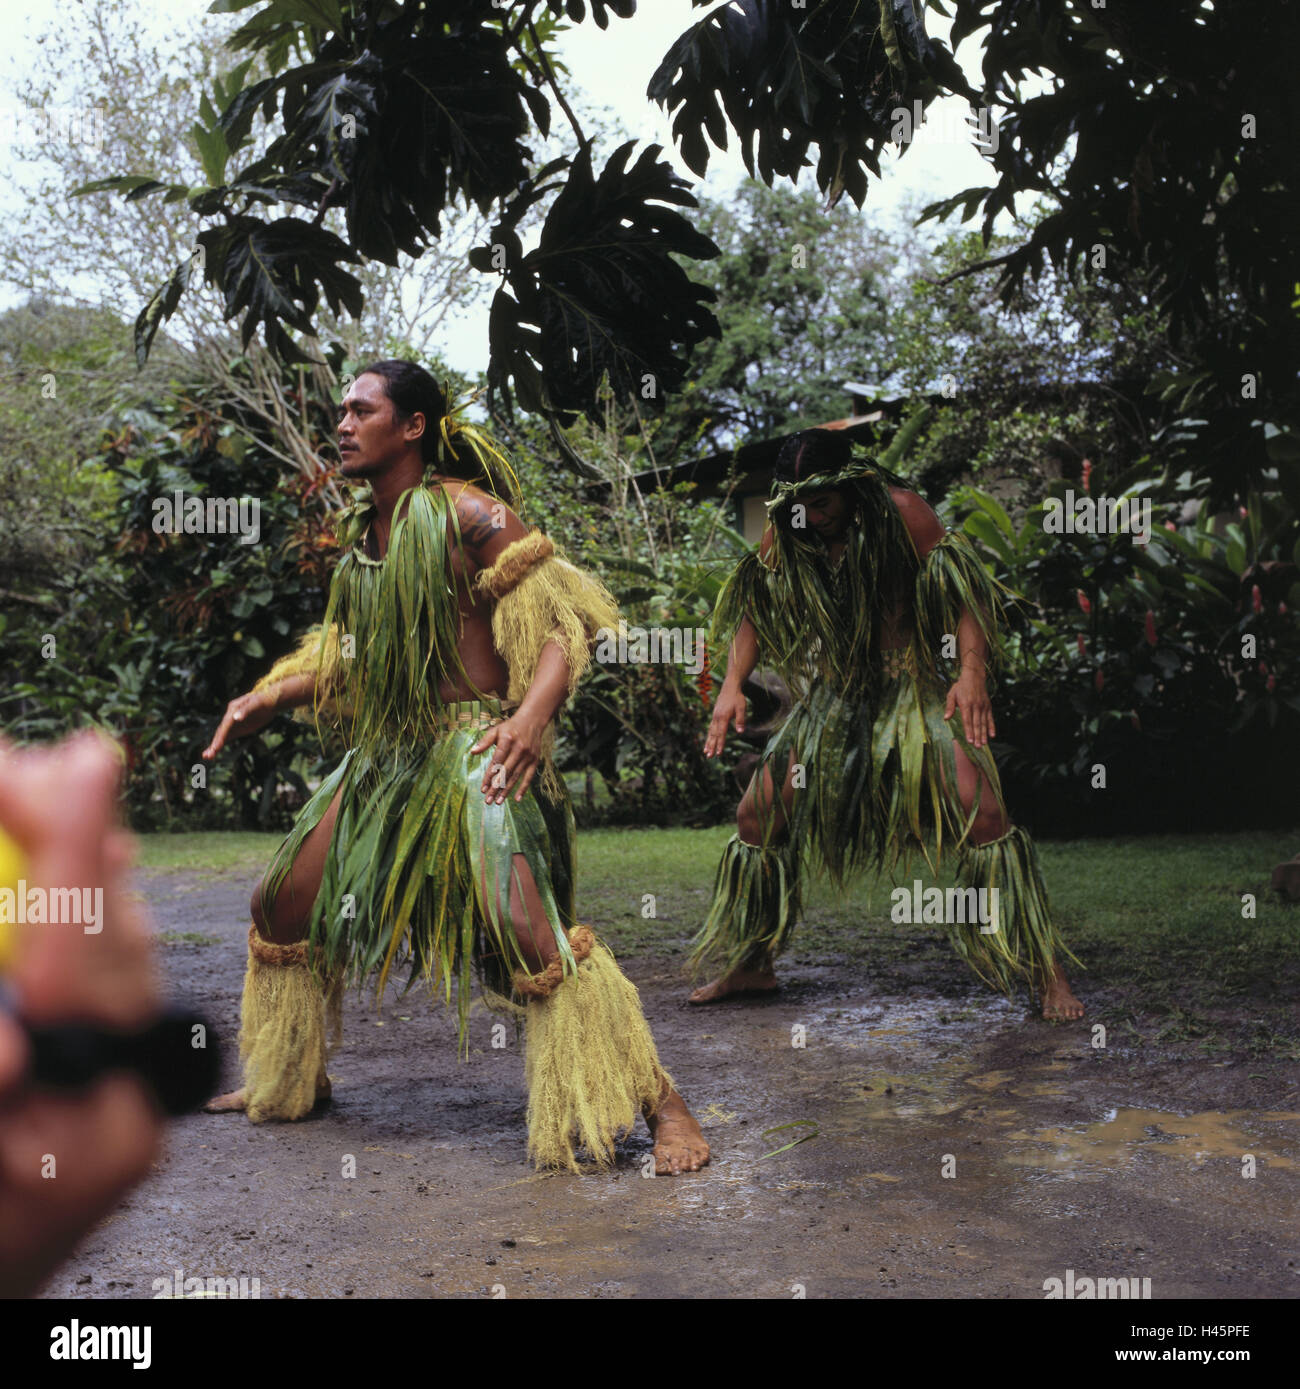 French Polynesia, Hiva Oa, compensating roller, space, person, locals, Polynesians, folklore group, performance, dance, motion, attraction, place of interest, destination, tourism, Stock Photo